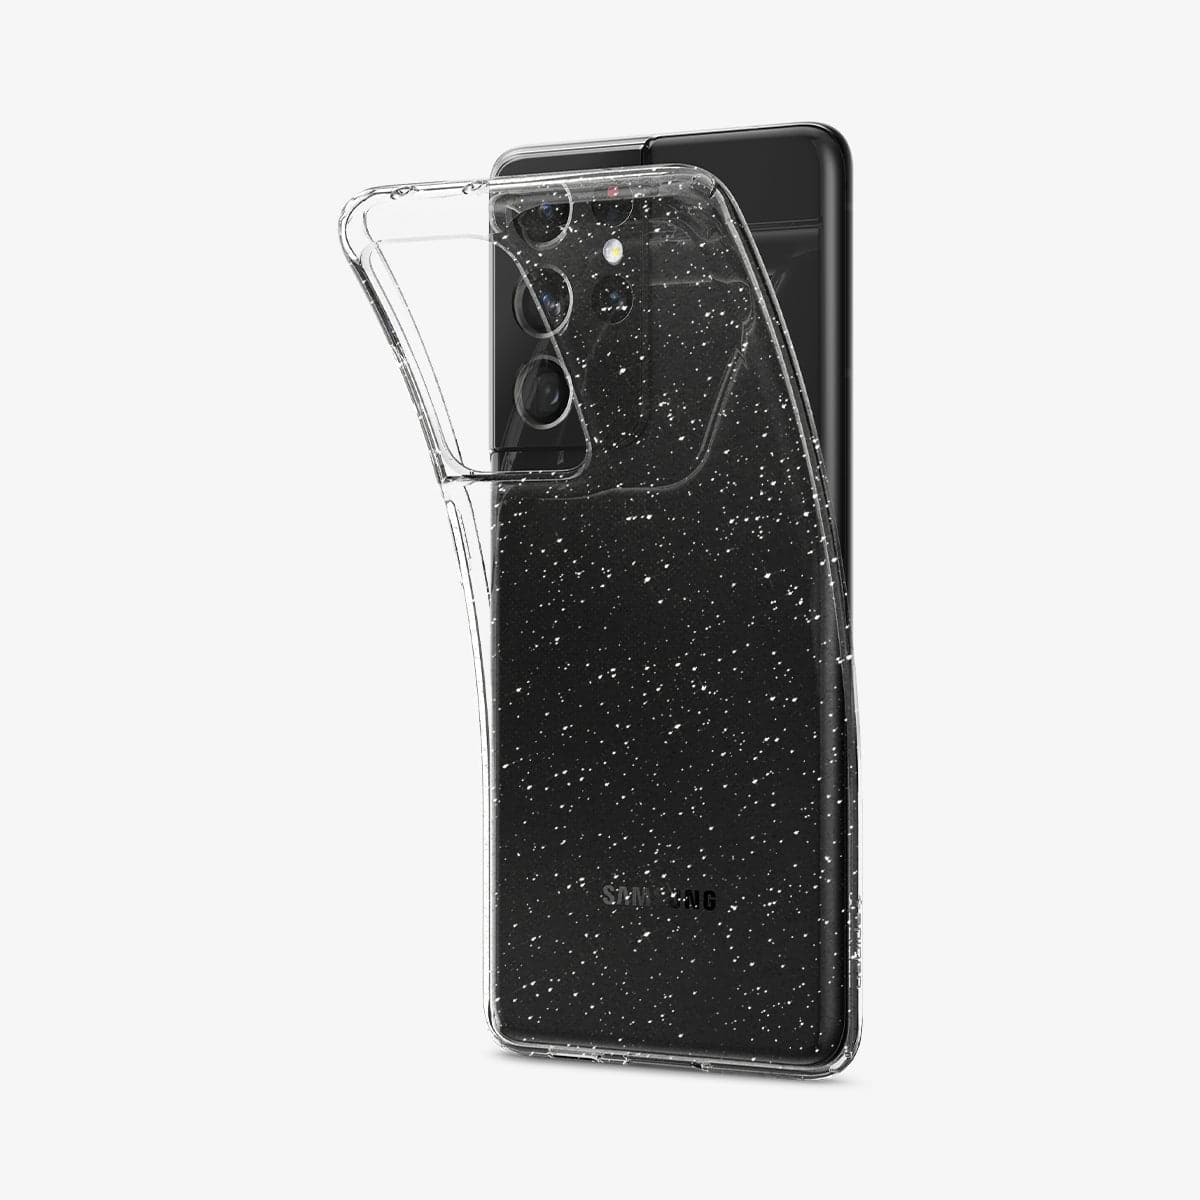 ACS02348 - Galaxy S21 Ultra Liquid Crystal Glitter Case in crystal quartz showing the back with case bending away from the device